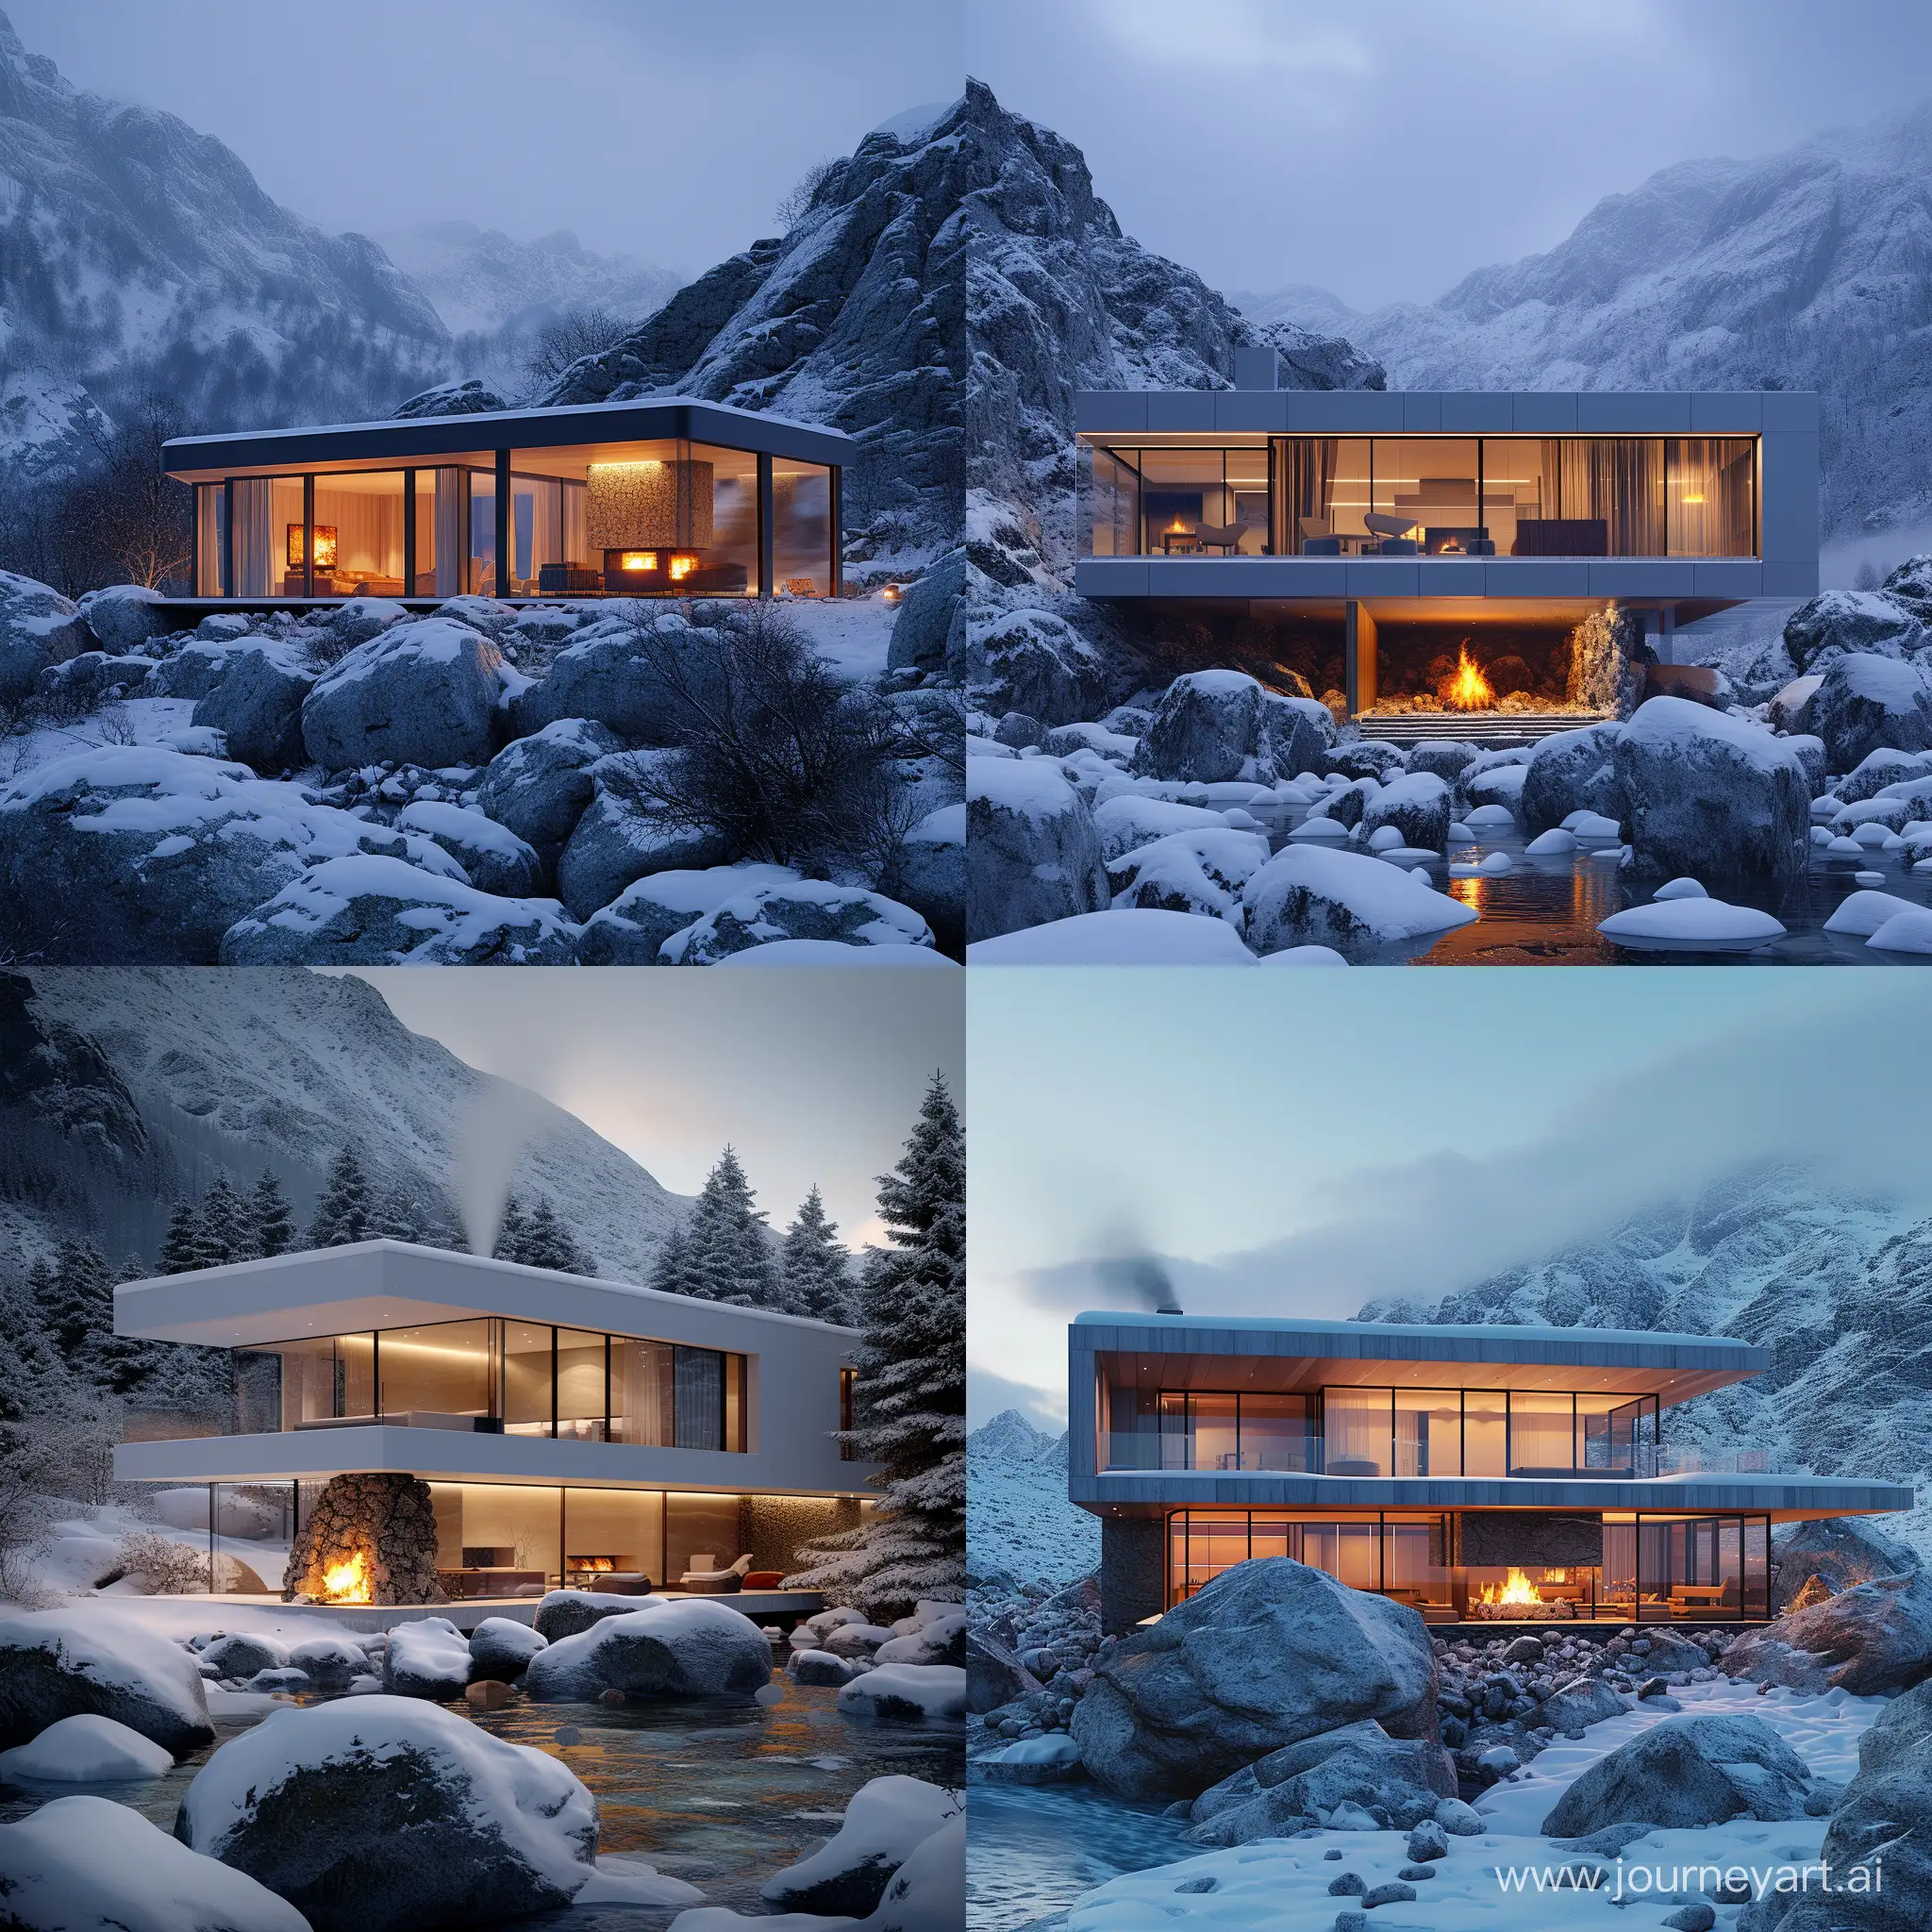 photorealistic ,canon 5D, a modern villa, on o rocks between mountain, full of snow, glossy facade, interior lighting, warm ambience inside with fireplace.